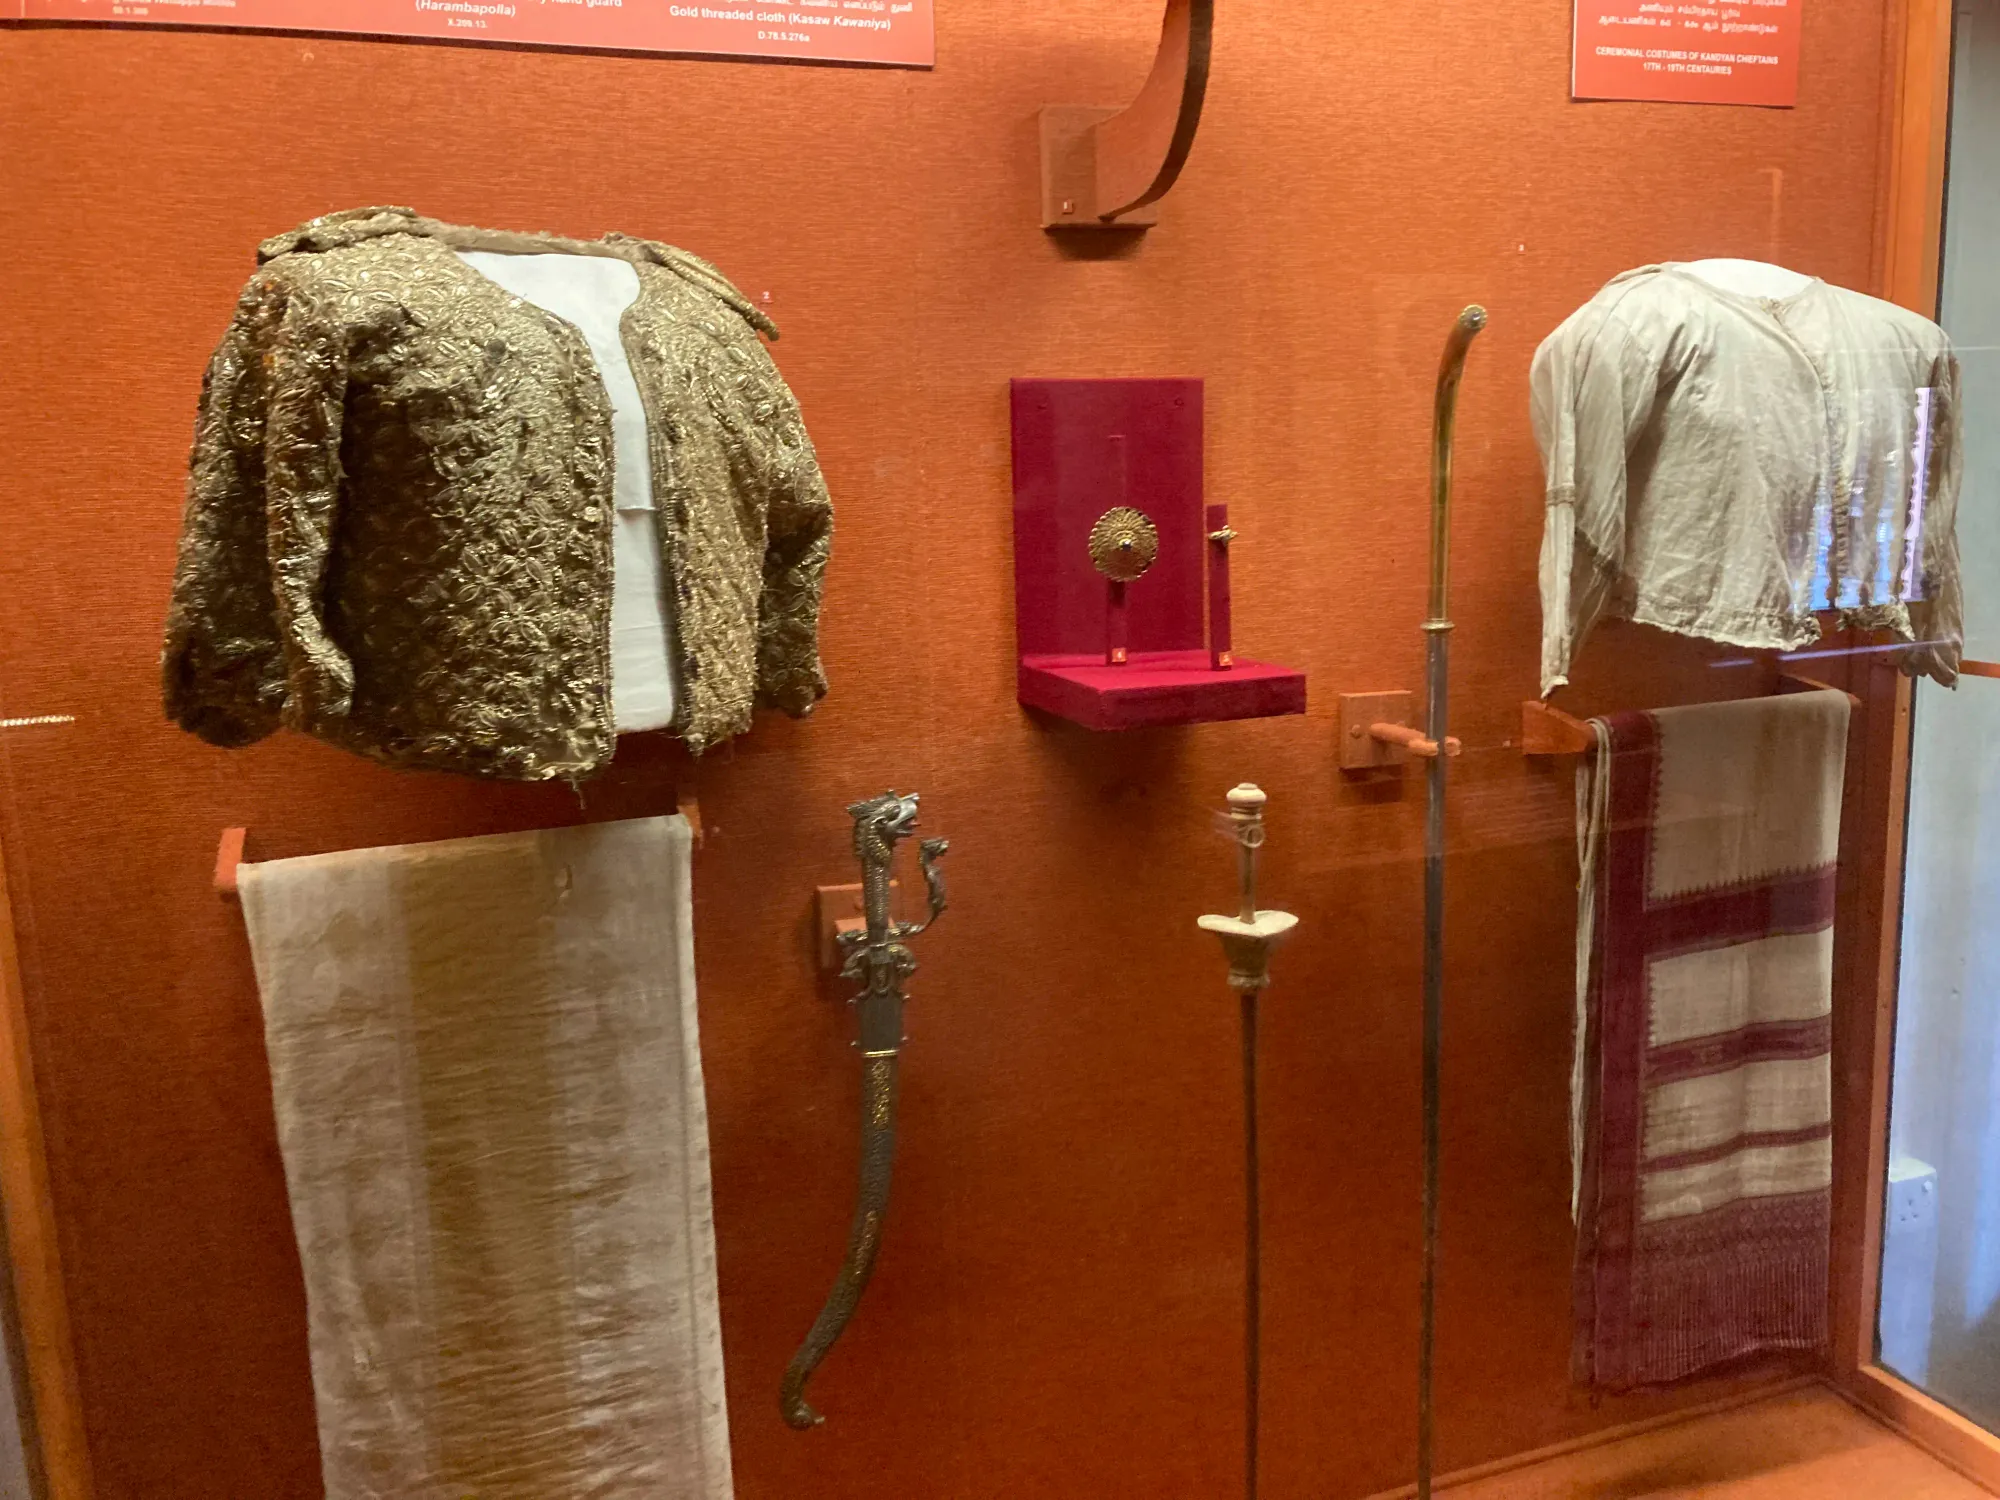 Ceremonial costumes displayed at the Kandy National Museum, Sri Lanka